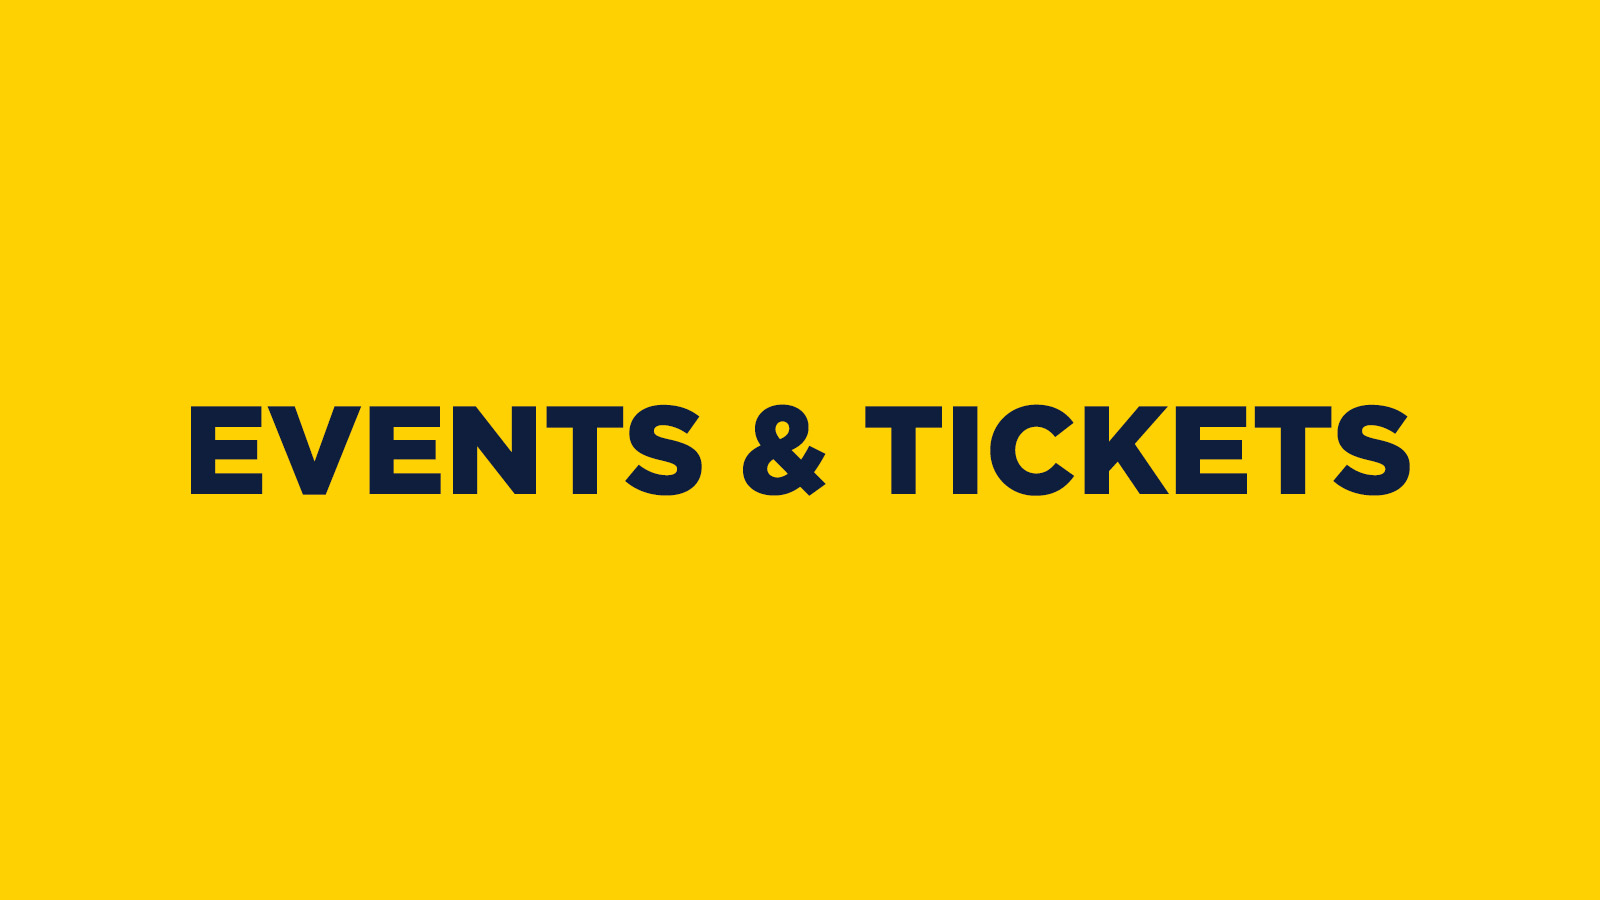 EVENTS & TICKETS